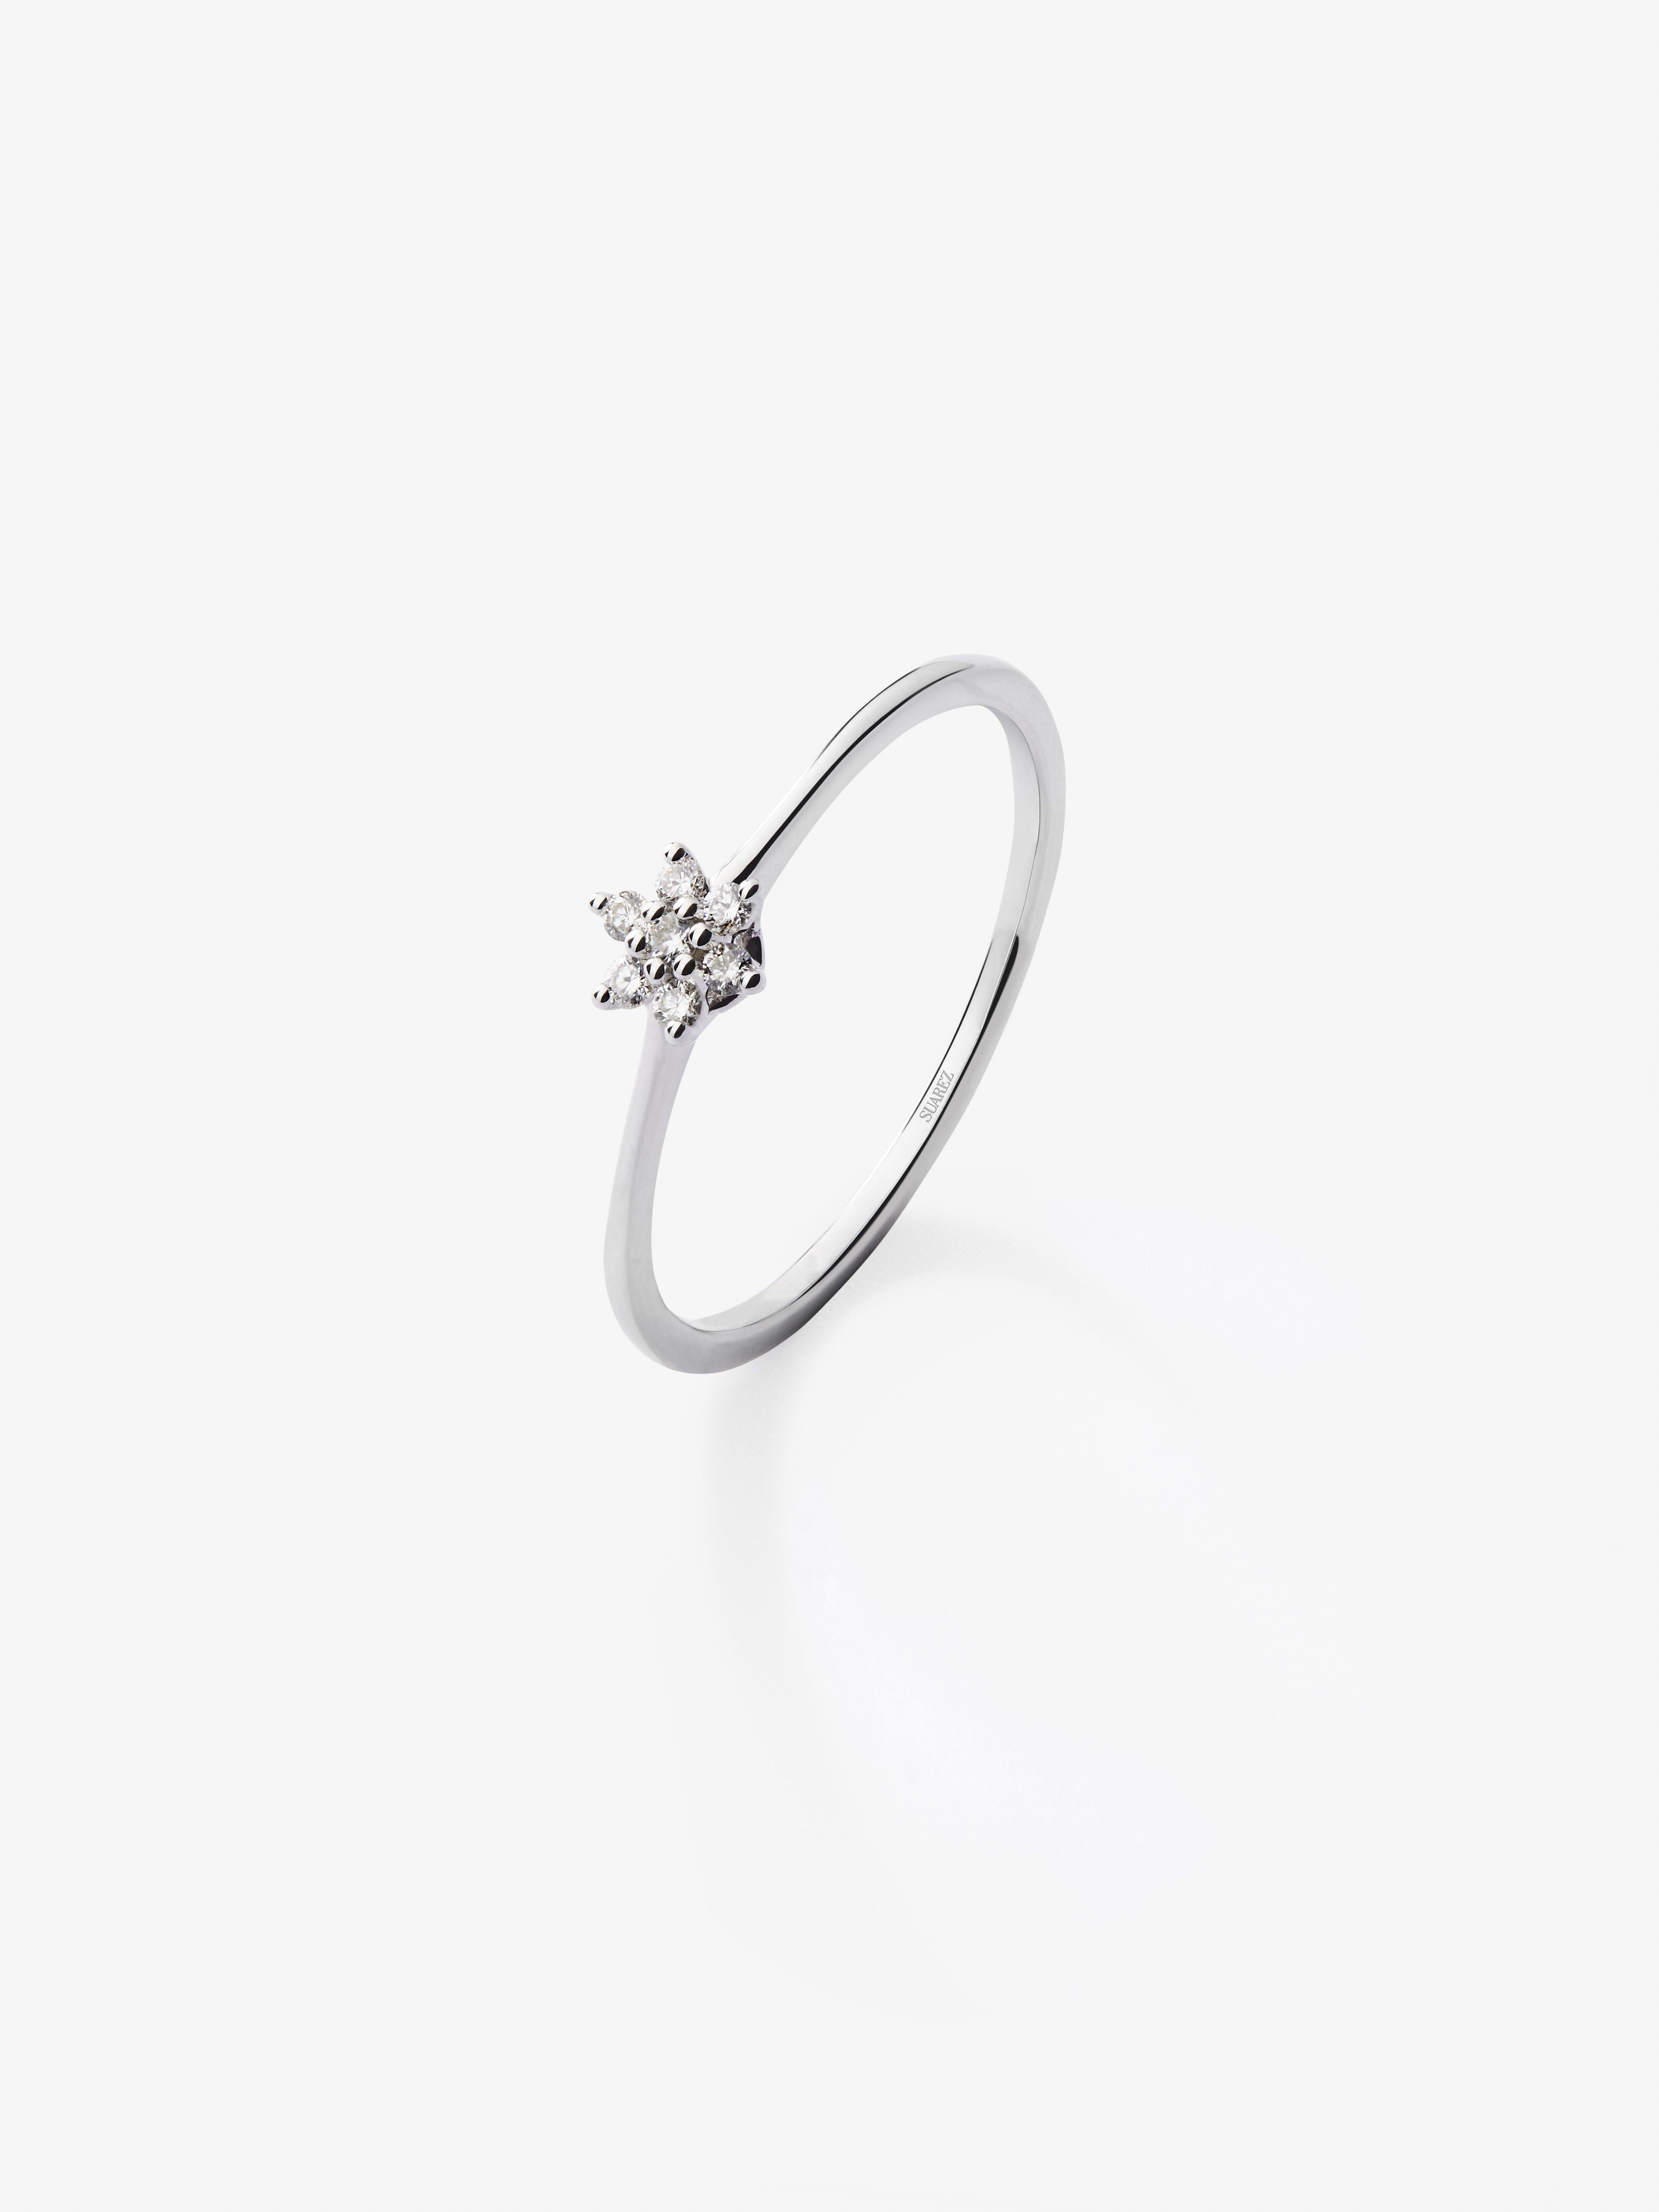 18K white gold ring with 7 brilliant-cut diamonds with a total of 0.07 cts and star shape